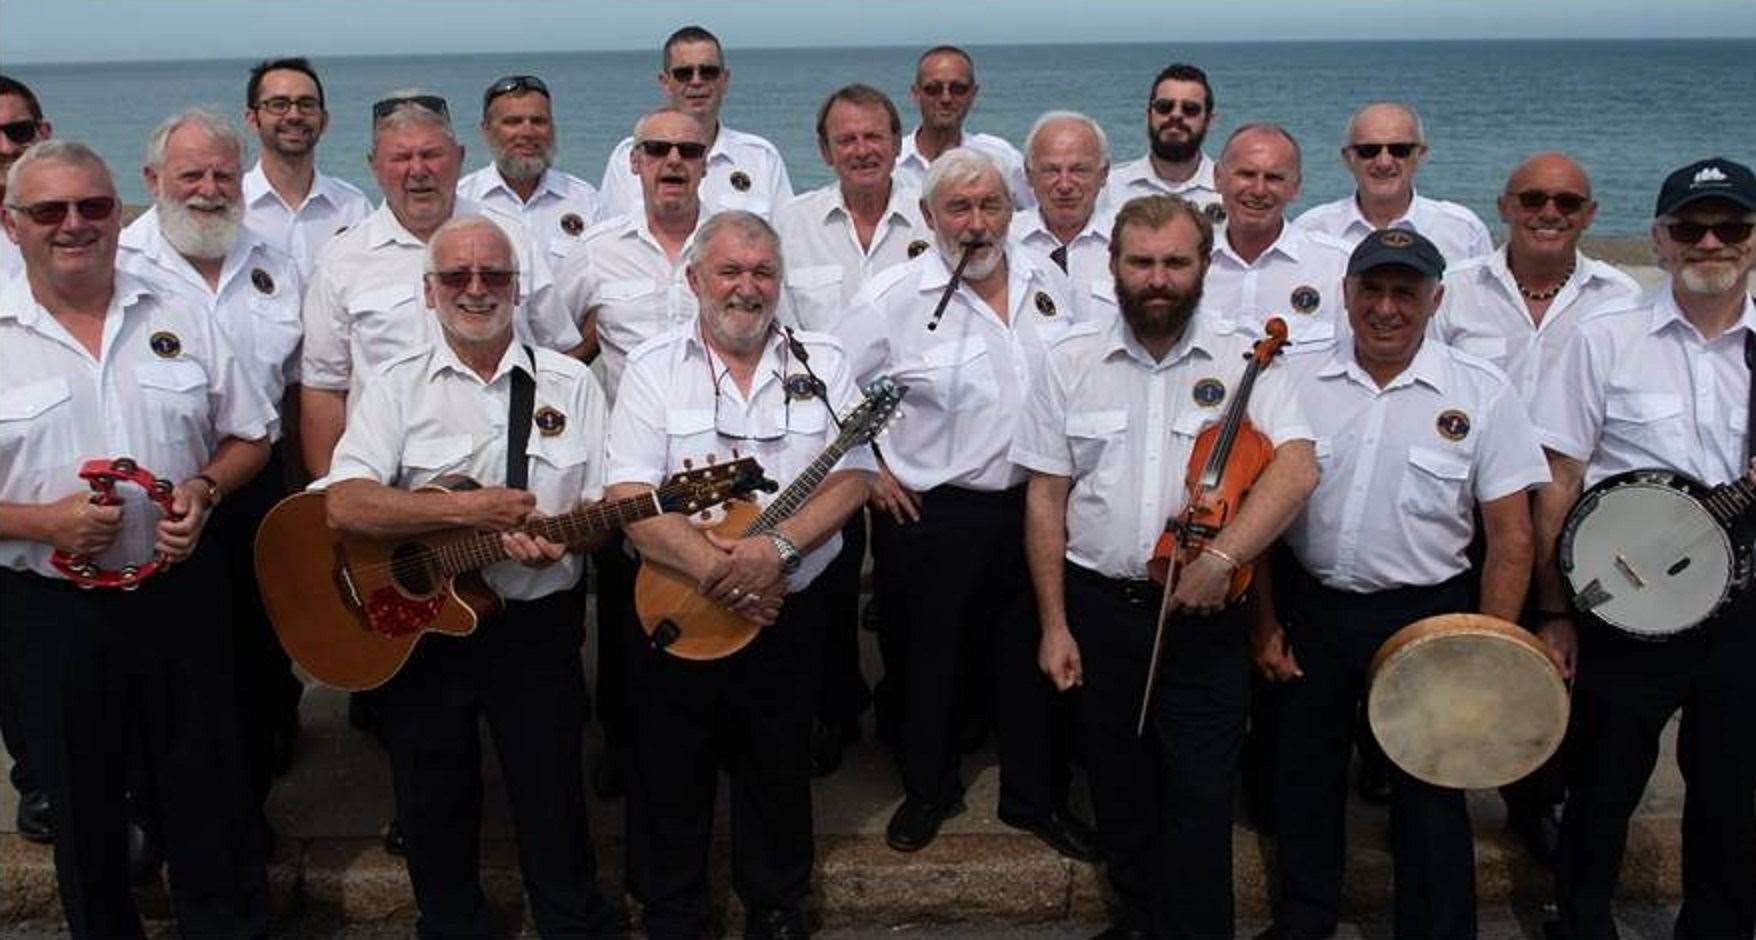 The Sheringham Shantymen, a group of singers from North Norfolk (The Sheringham Shantymen)